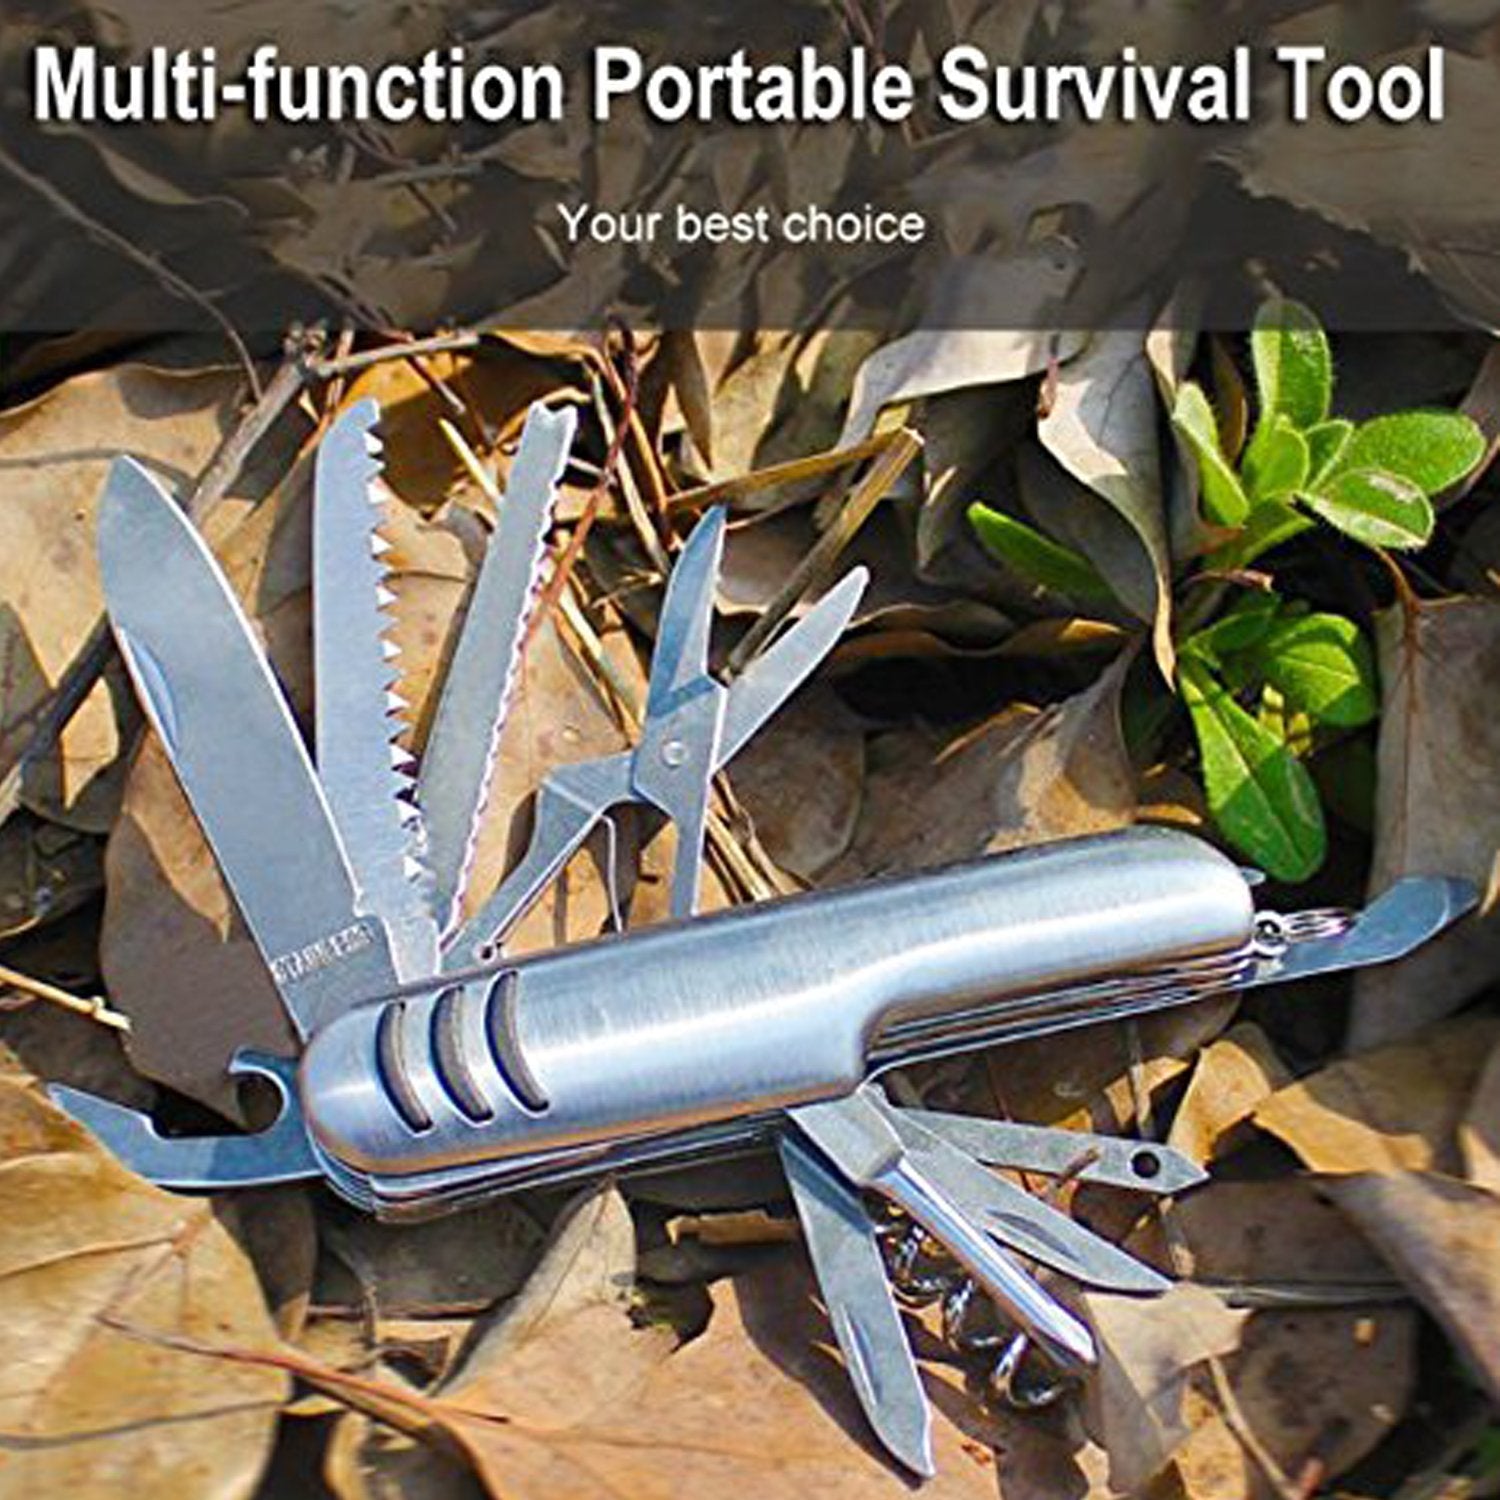 0500 Multi functional Stainless Steel Folding Pocket Knife (11 in 1 screwdriver) - SkyShopy